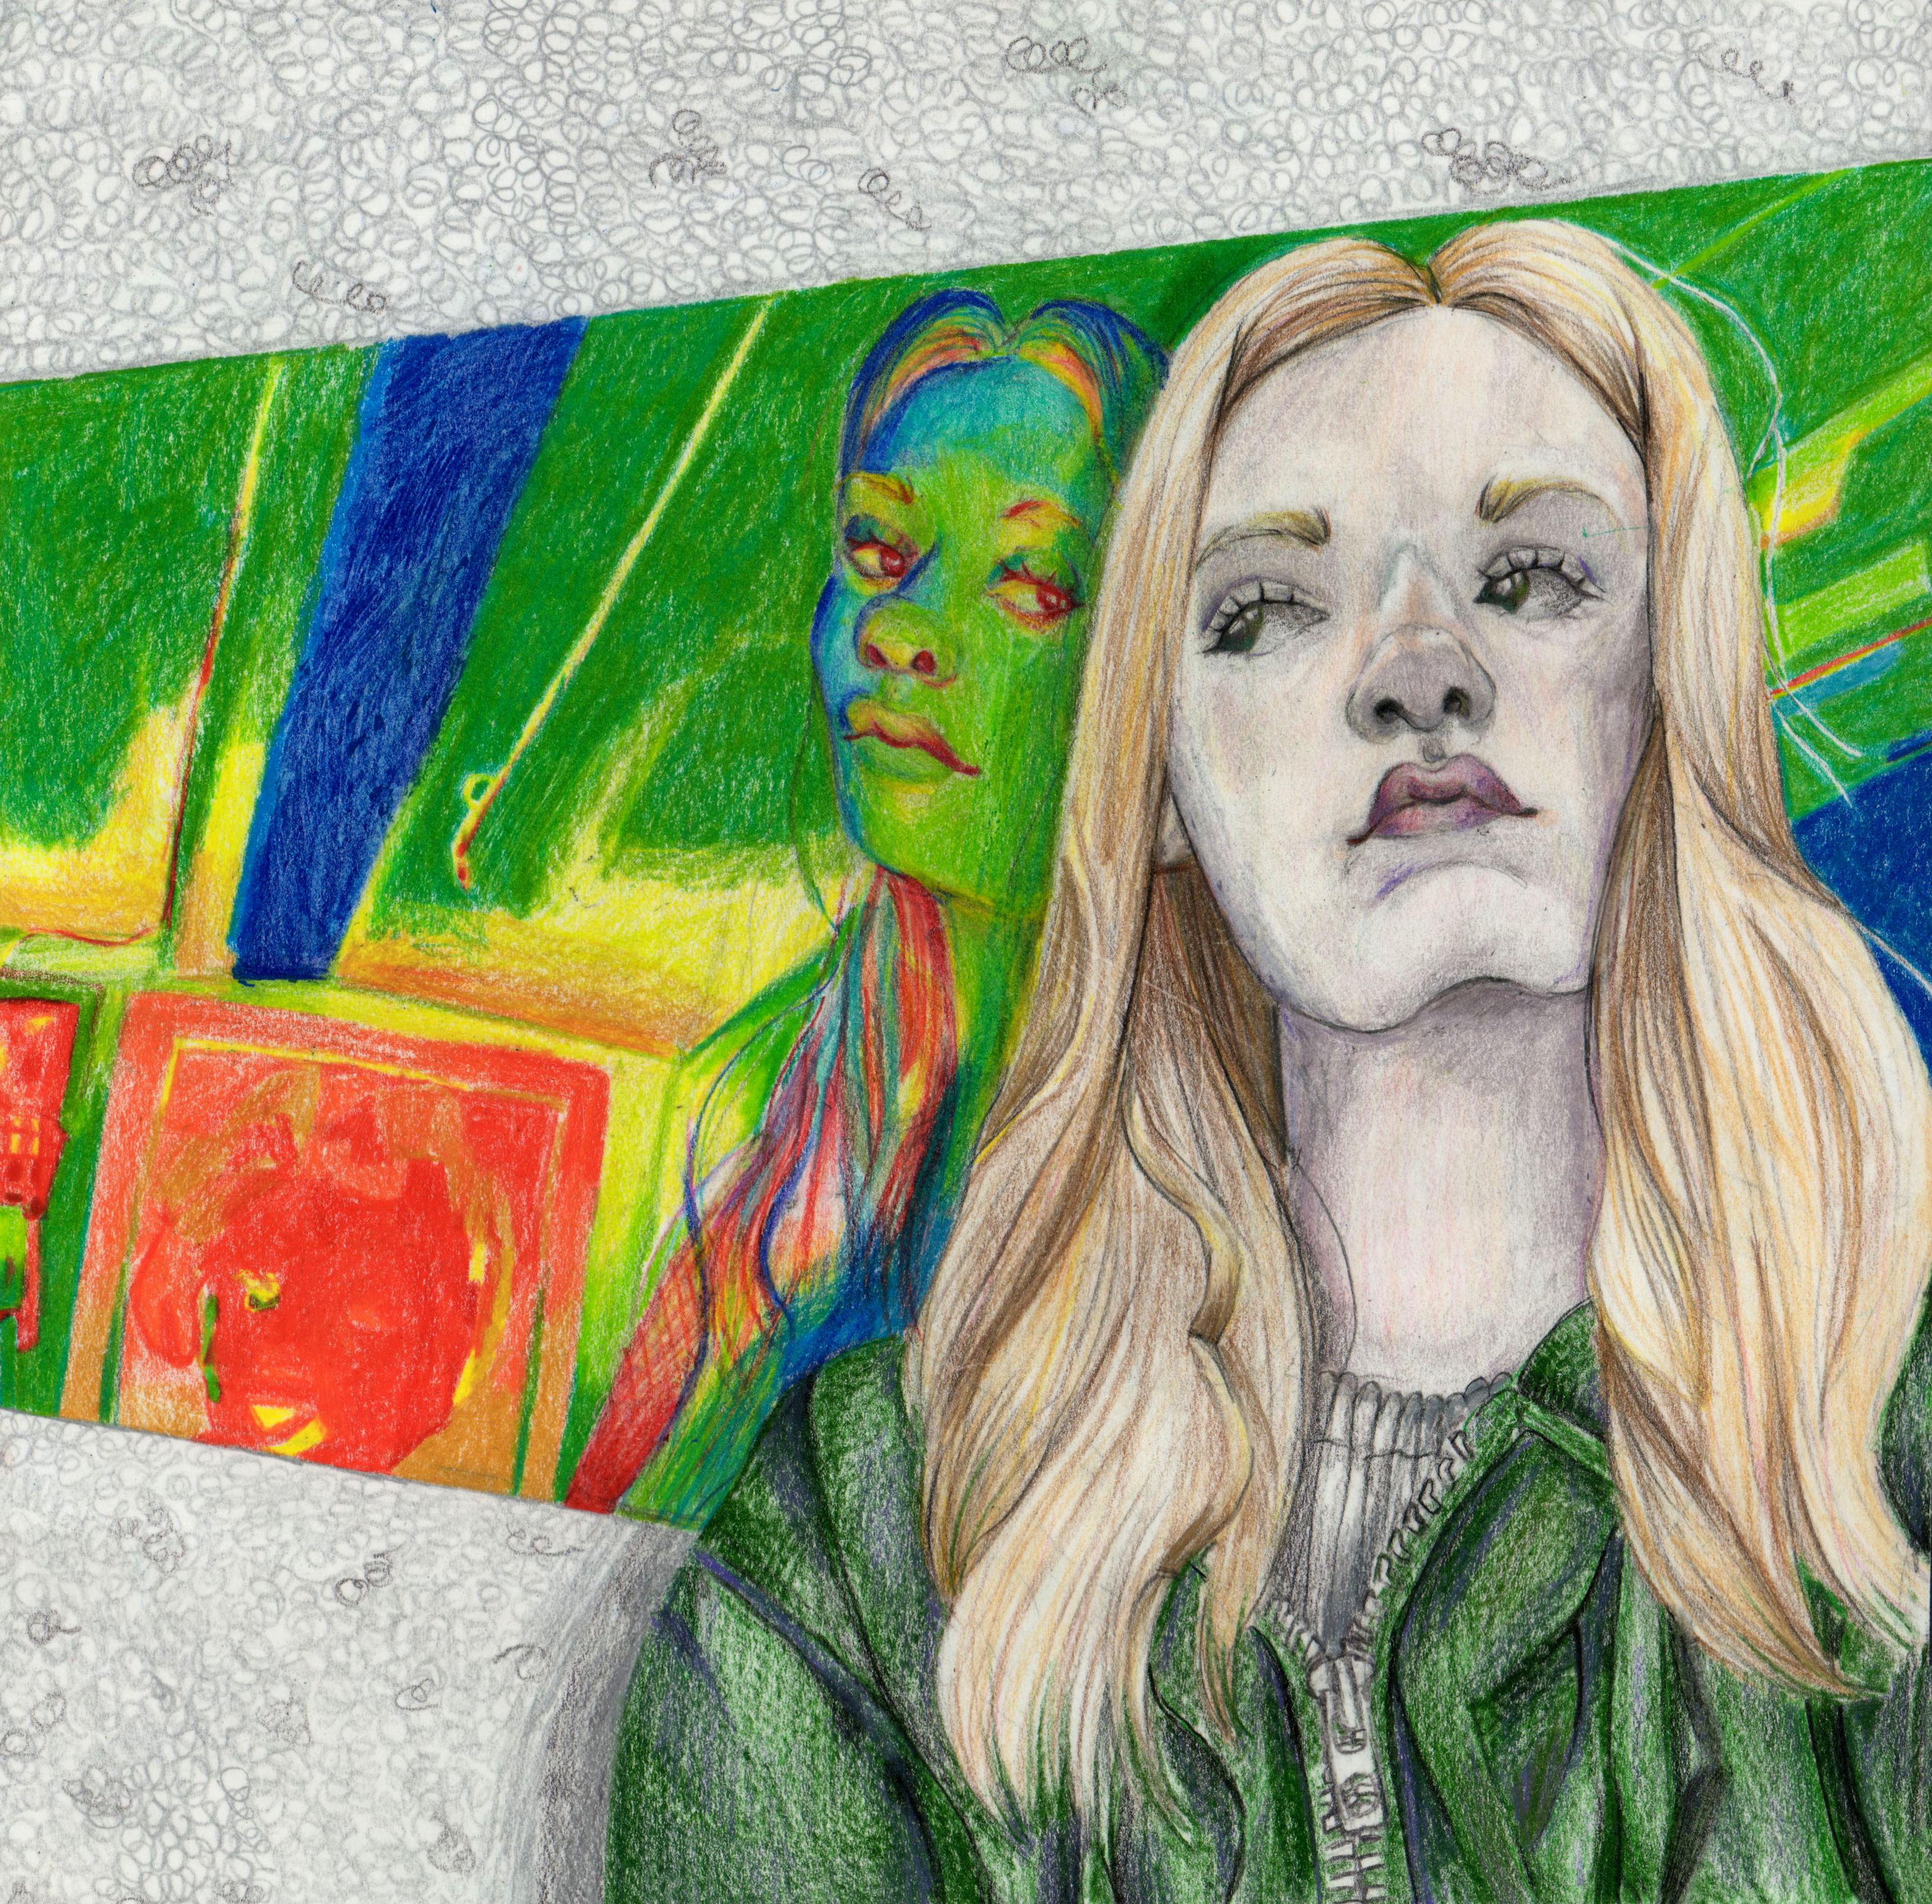 Colored pencil self-portrait of white adolescent girl with long blond hair facing the viewer. She wears a green jacket and looks over and behind her right shoulder to a green-hued reflection of her face that looks directly back at her. Her reflection is enclosed in a green surface with slanted, gray stony walls above and below. A large, bright red square shines in the left side of the reflective surface, and a thick blue beam emerges vertically from the top of the red square.